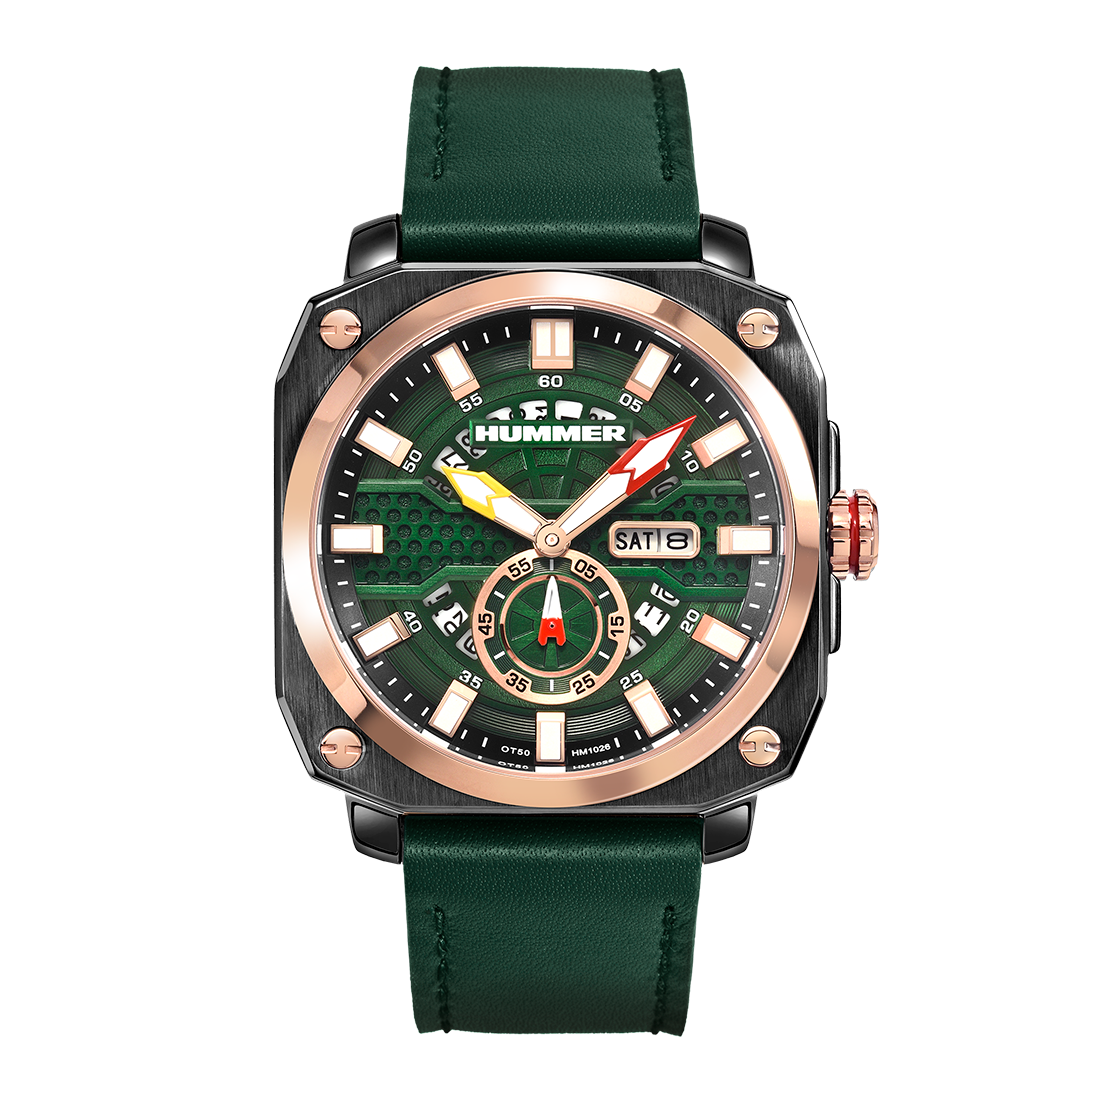 Wrist Watch-hummer Corporate Gifts Supplier in price range Rs 201-300 in  Pune, India | Customized Corporate Gifts Supplier & Manufacturer